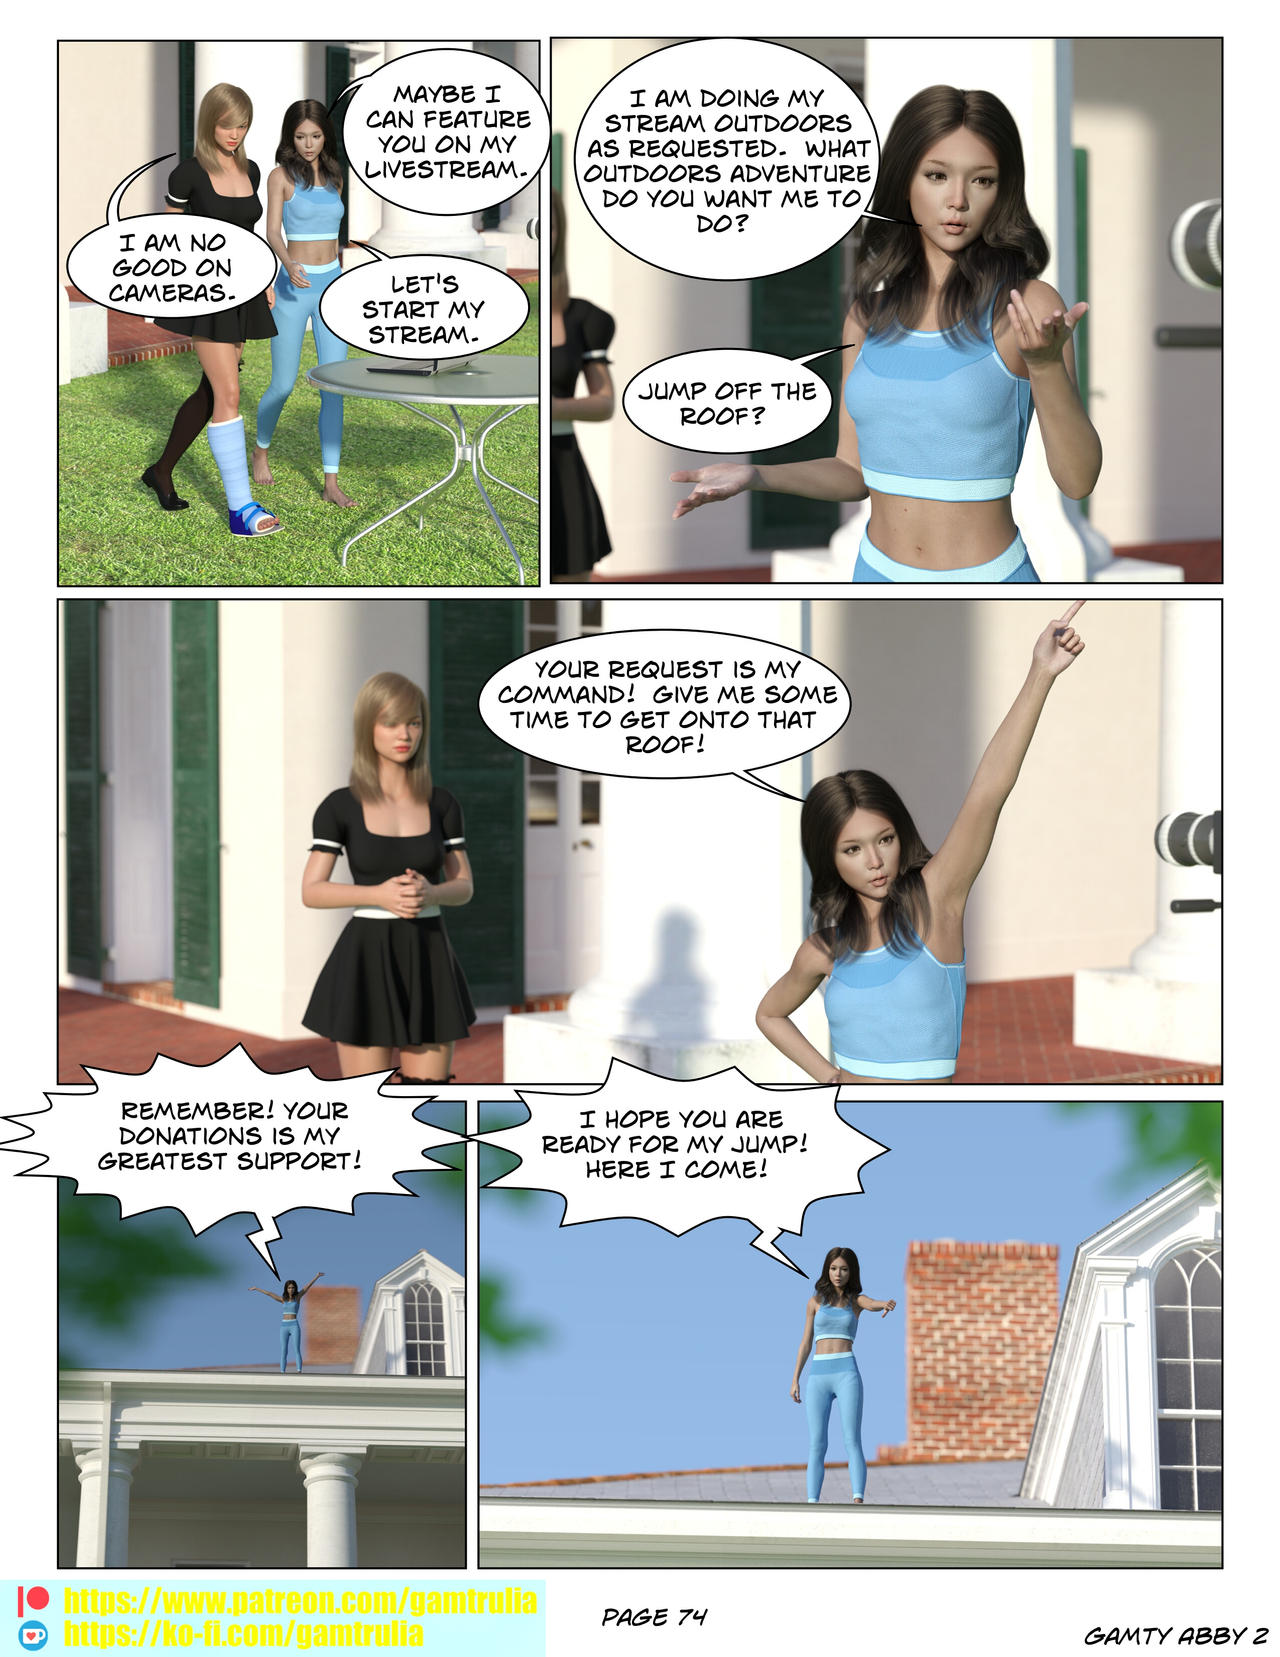 Gamty Abby 2 Page 74 by Gamtrulia on DeviantArt